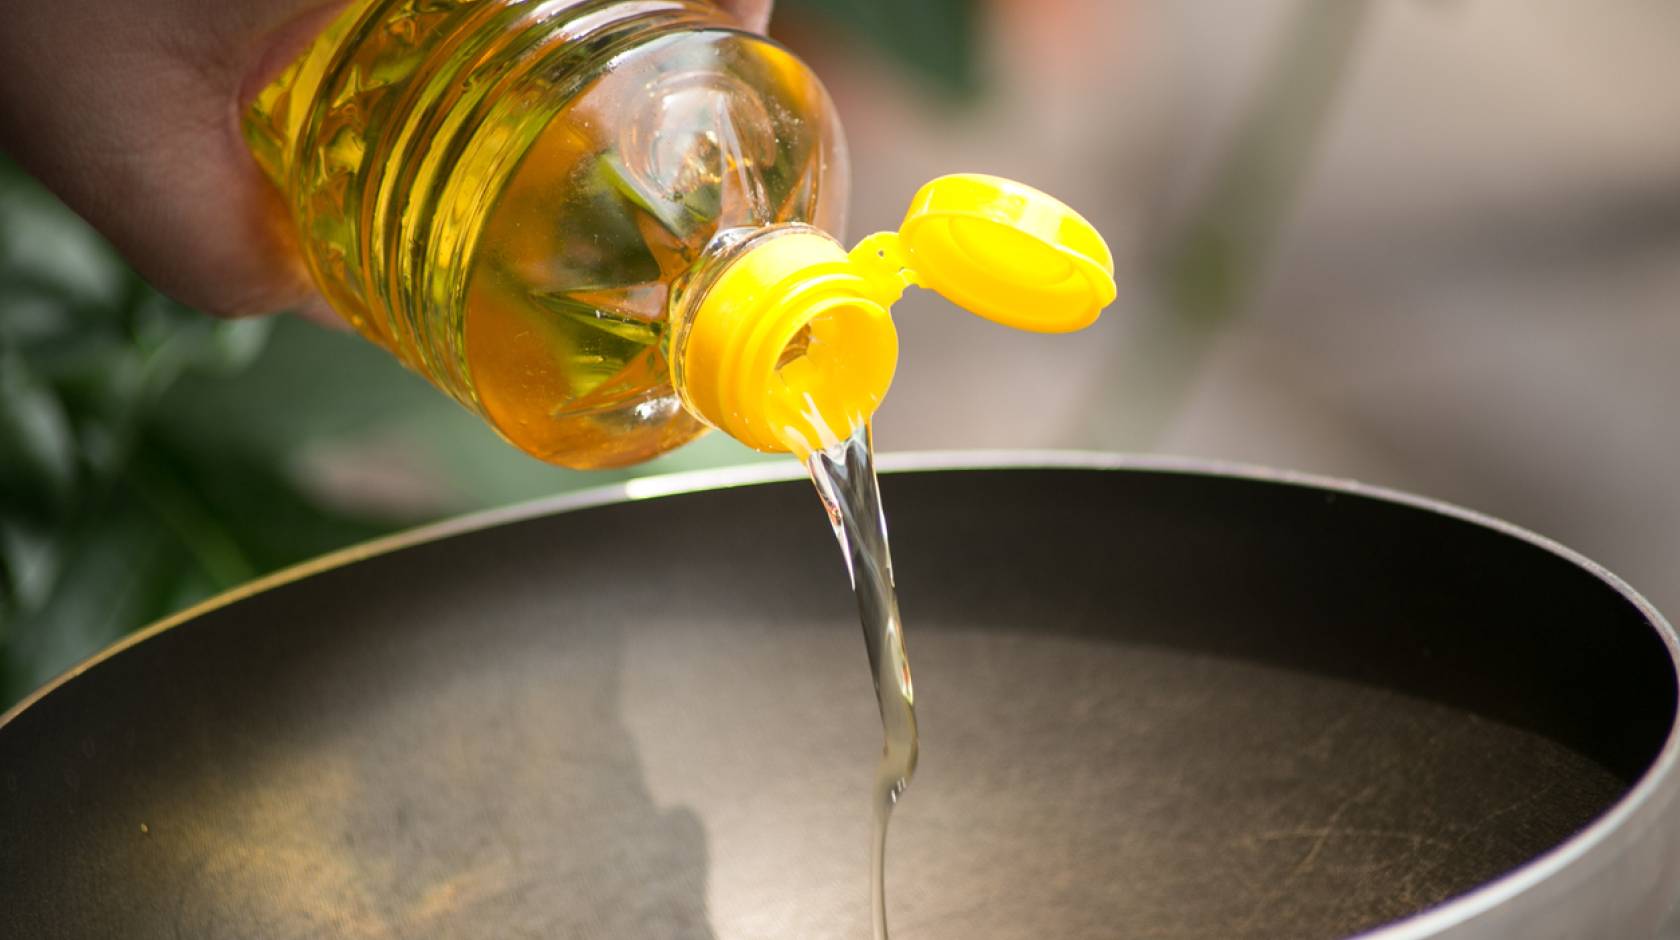 Soybean oil being poured into a hot skillet